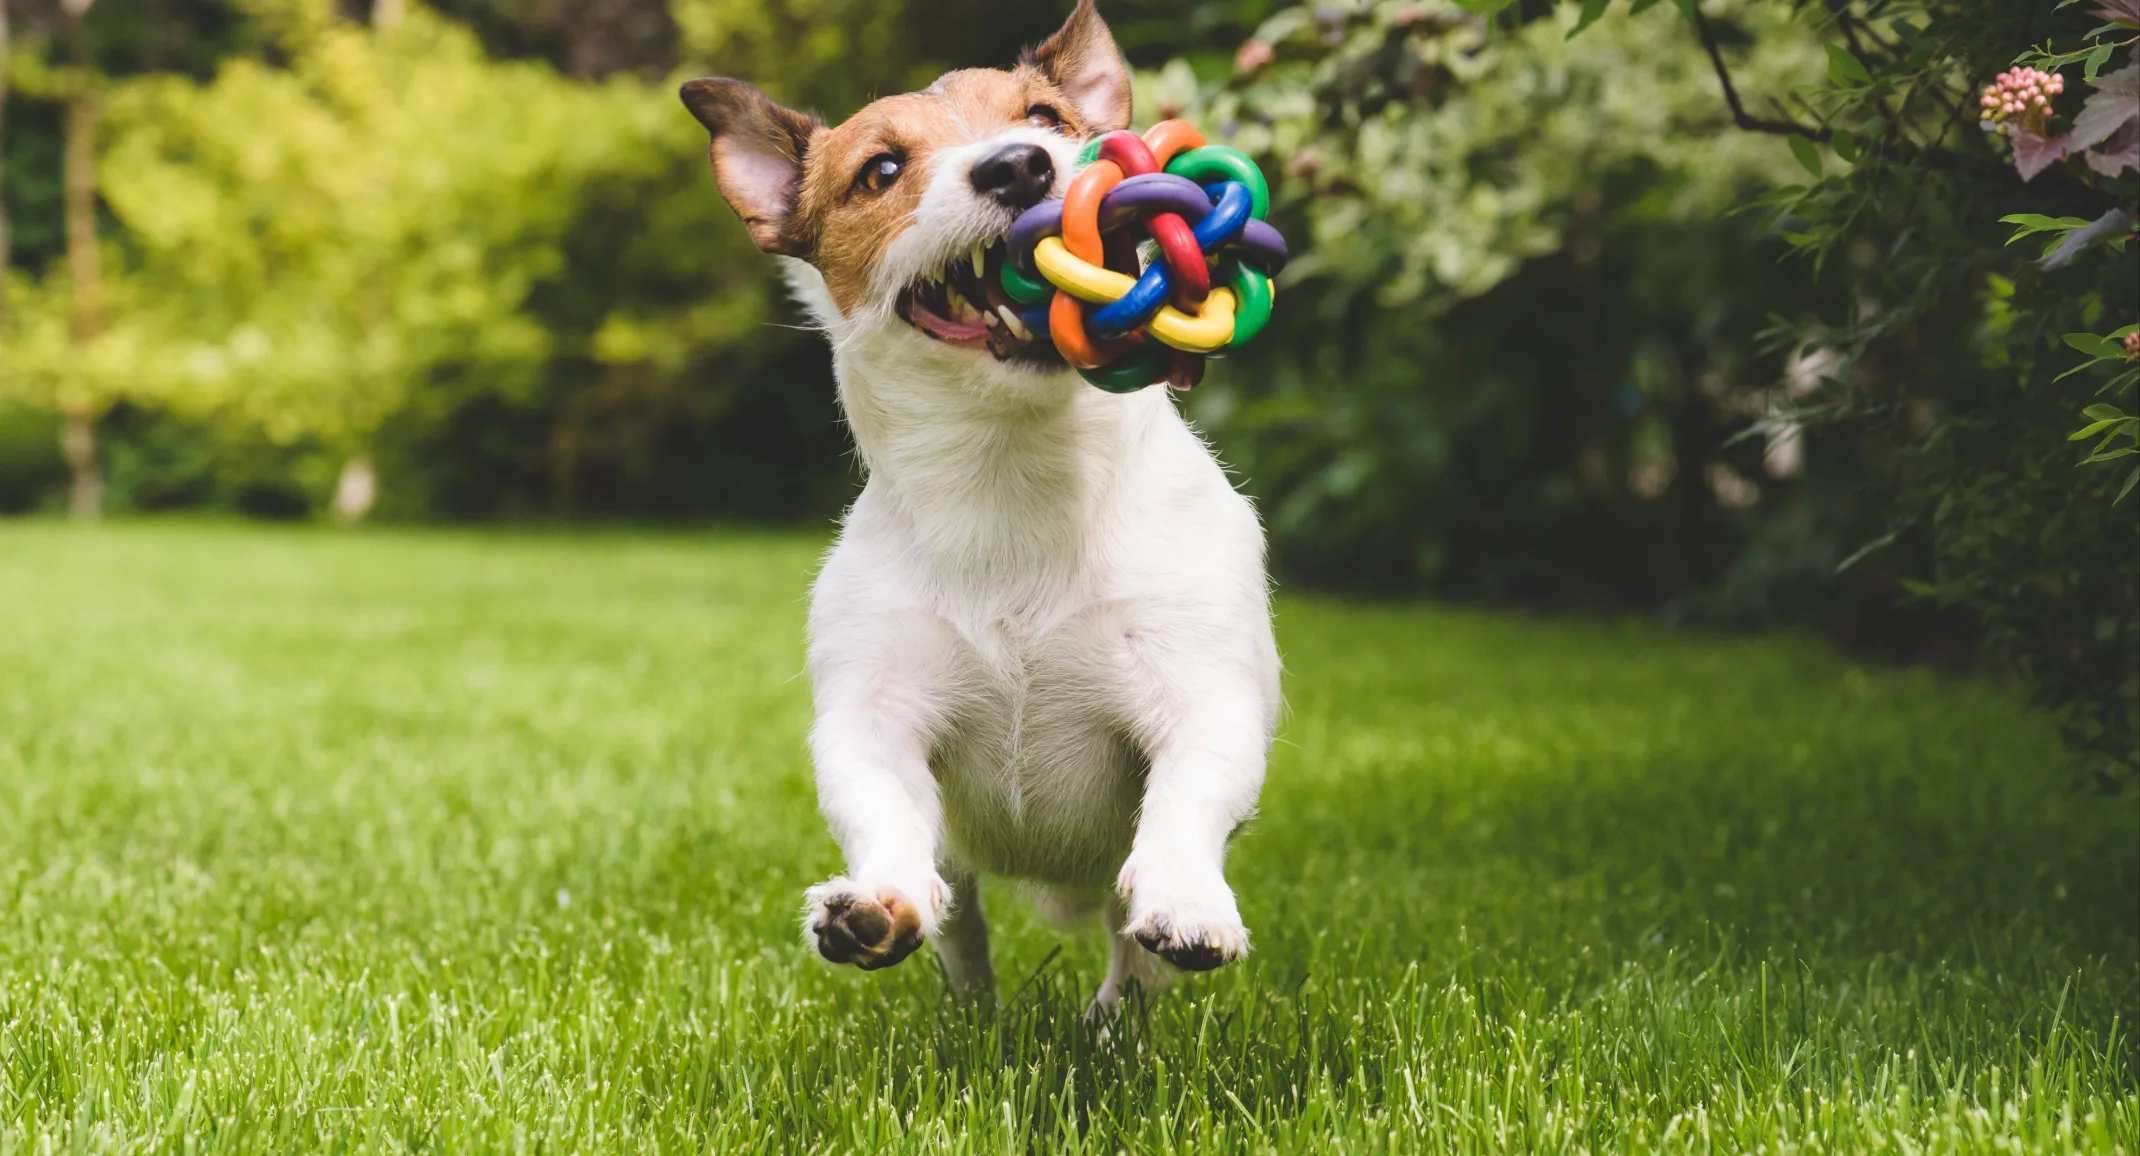 dog playing with a colorful toy